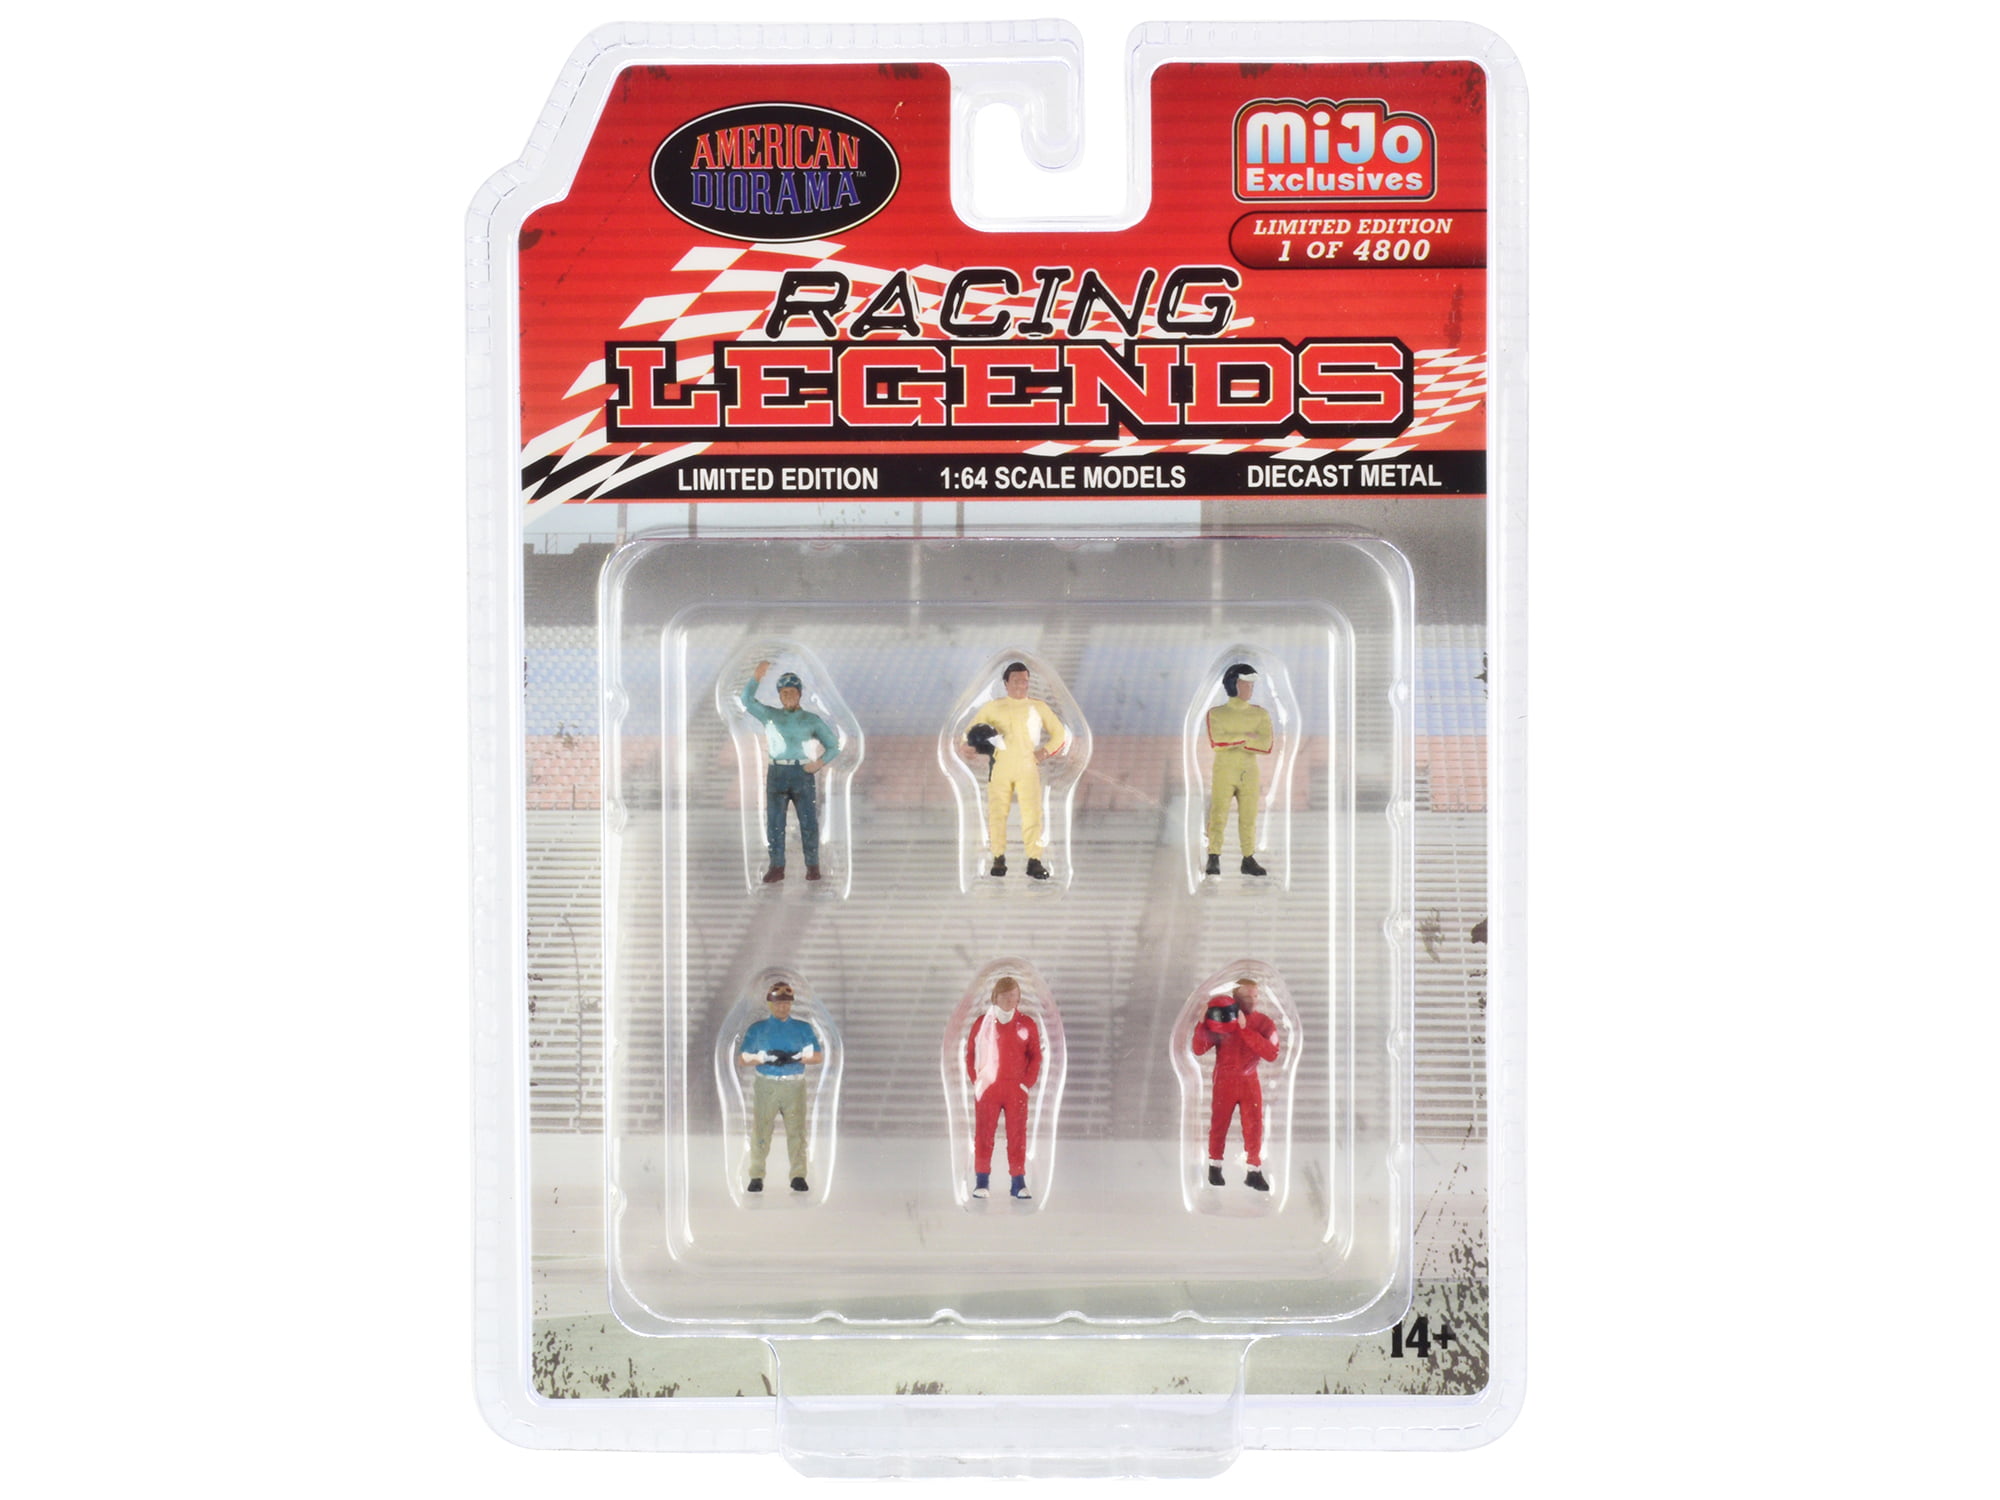 Picture of American Diorama AD-76503MJ Racing Legends 6 Piece Diecast Set - 6 Driver Figures Limited Edition Worldwide 1-64 Scale Models - 4800 Piece